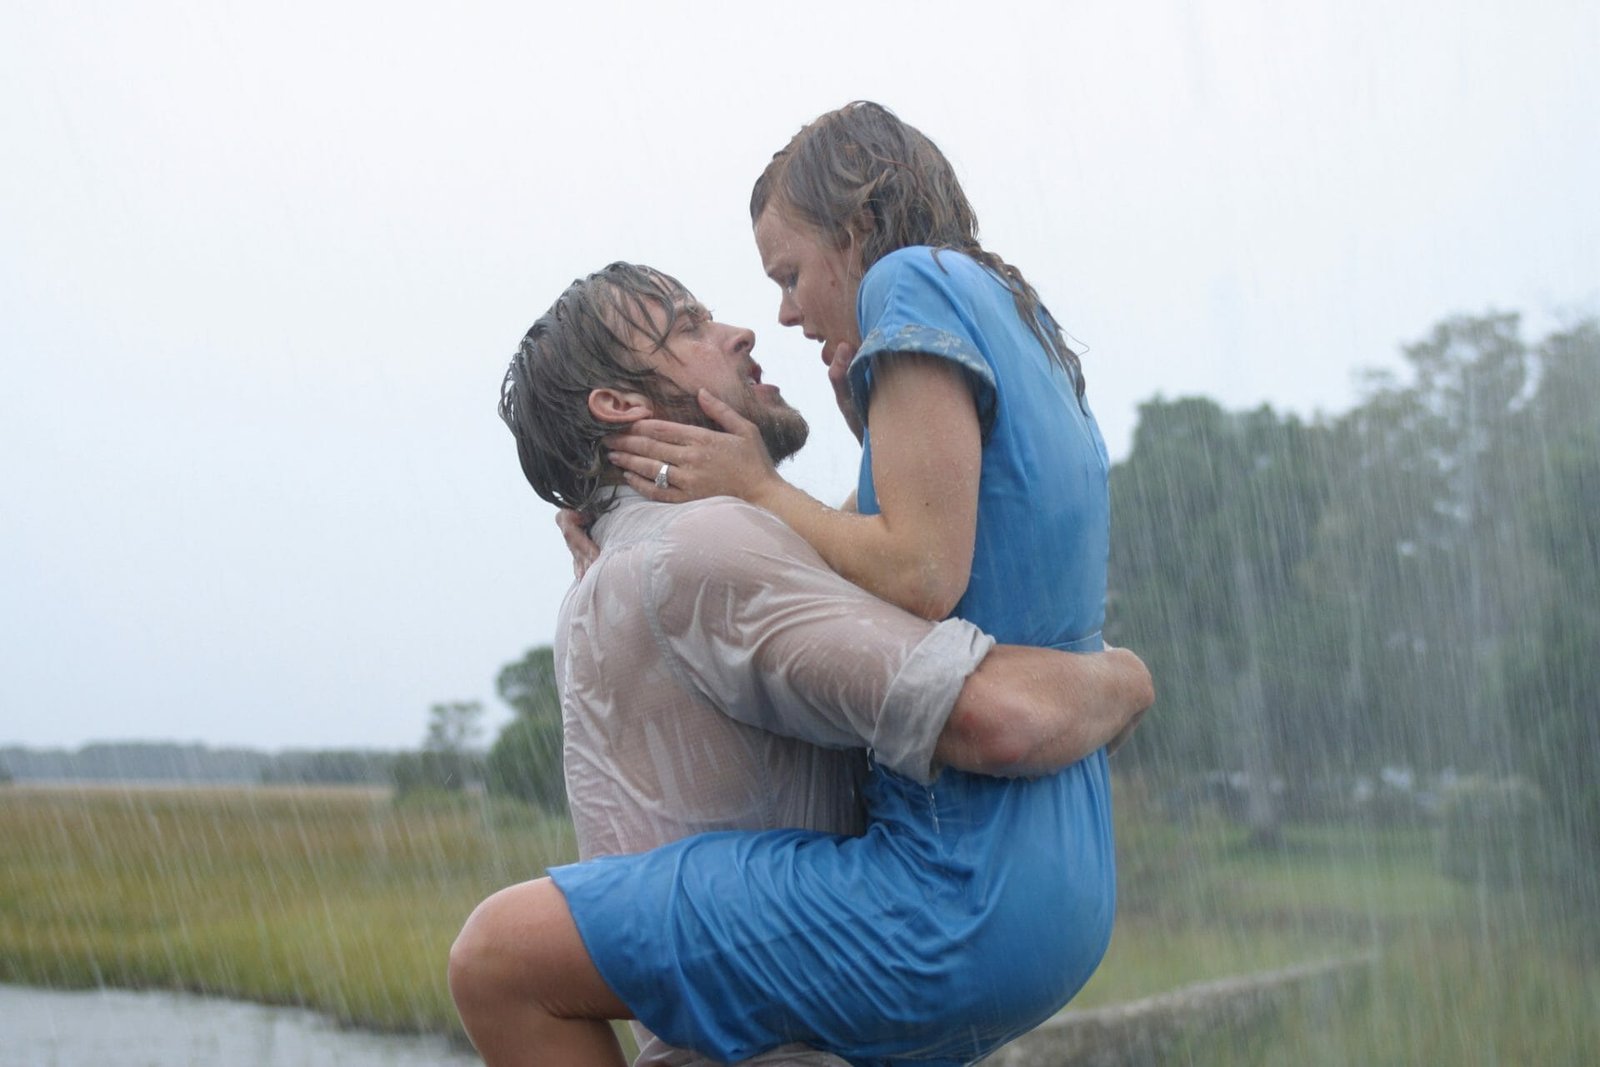 Best Romance On HBO Max: The Notebook (2004)